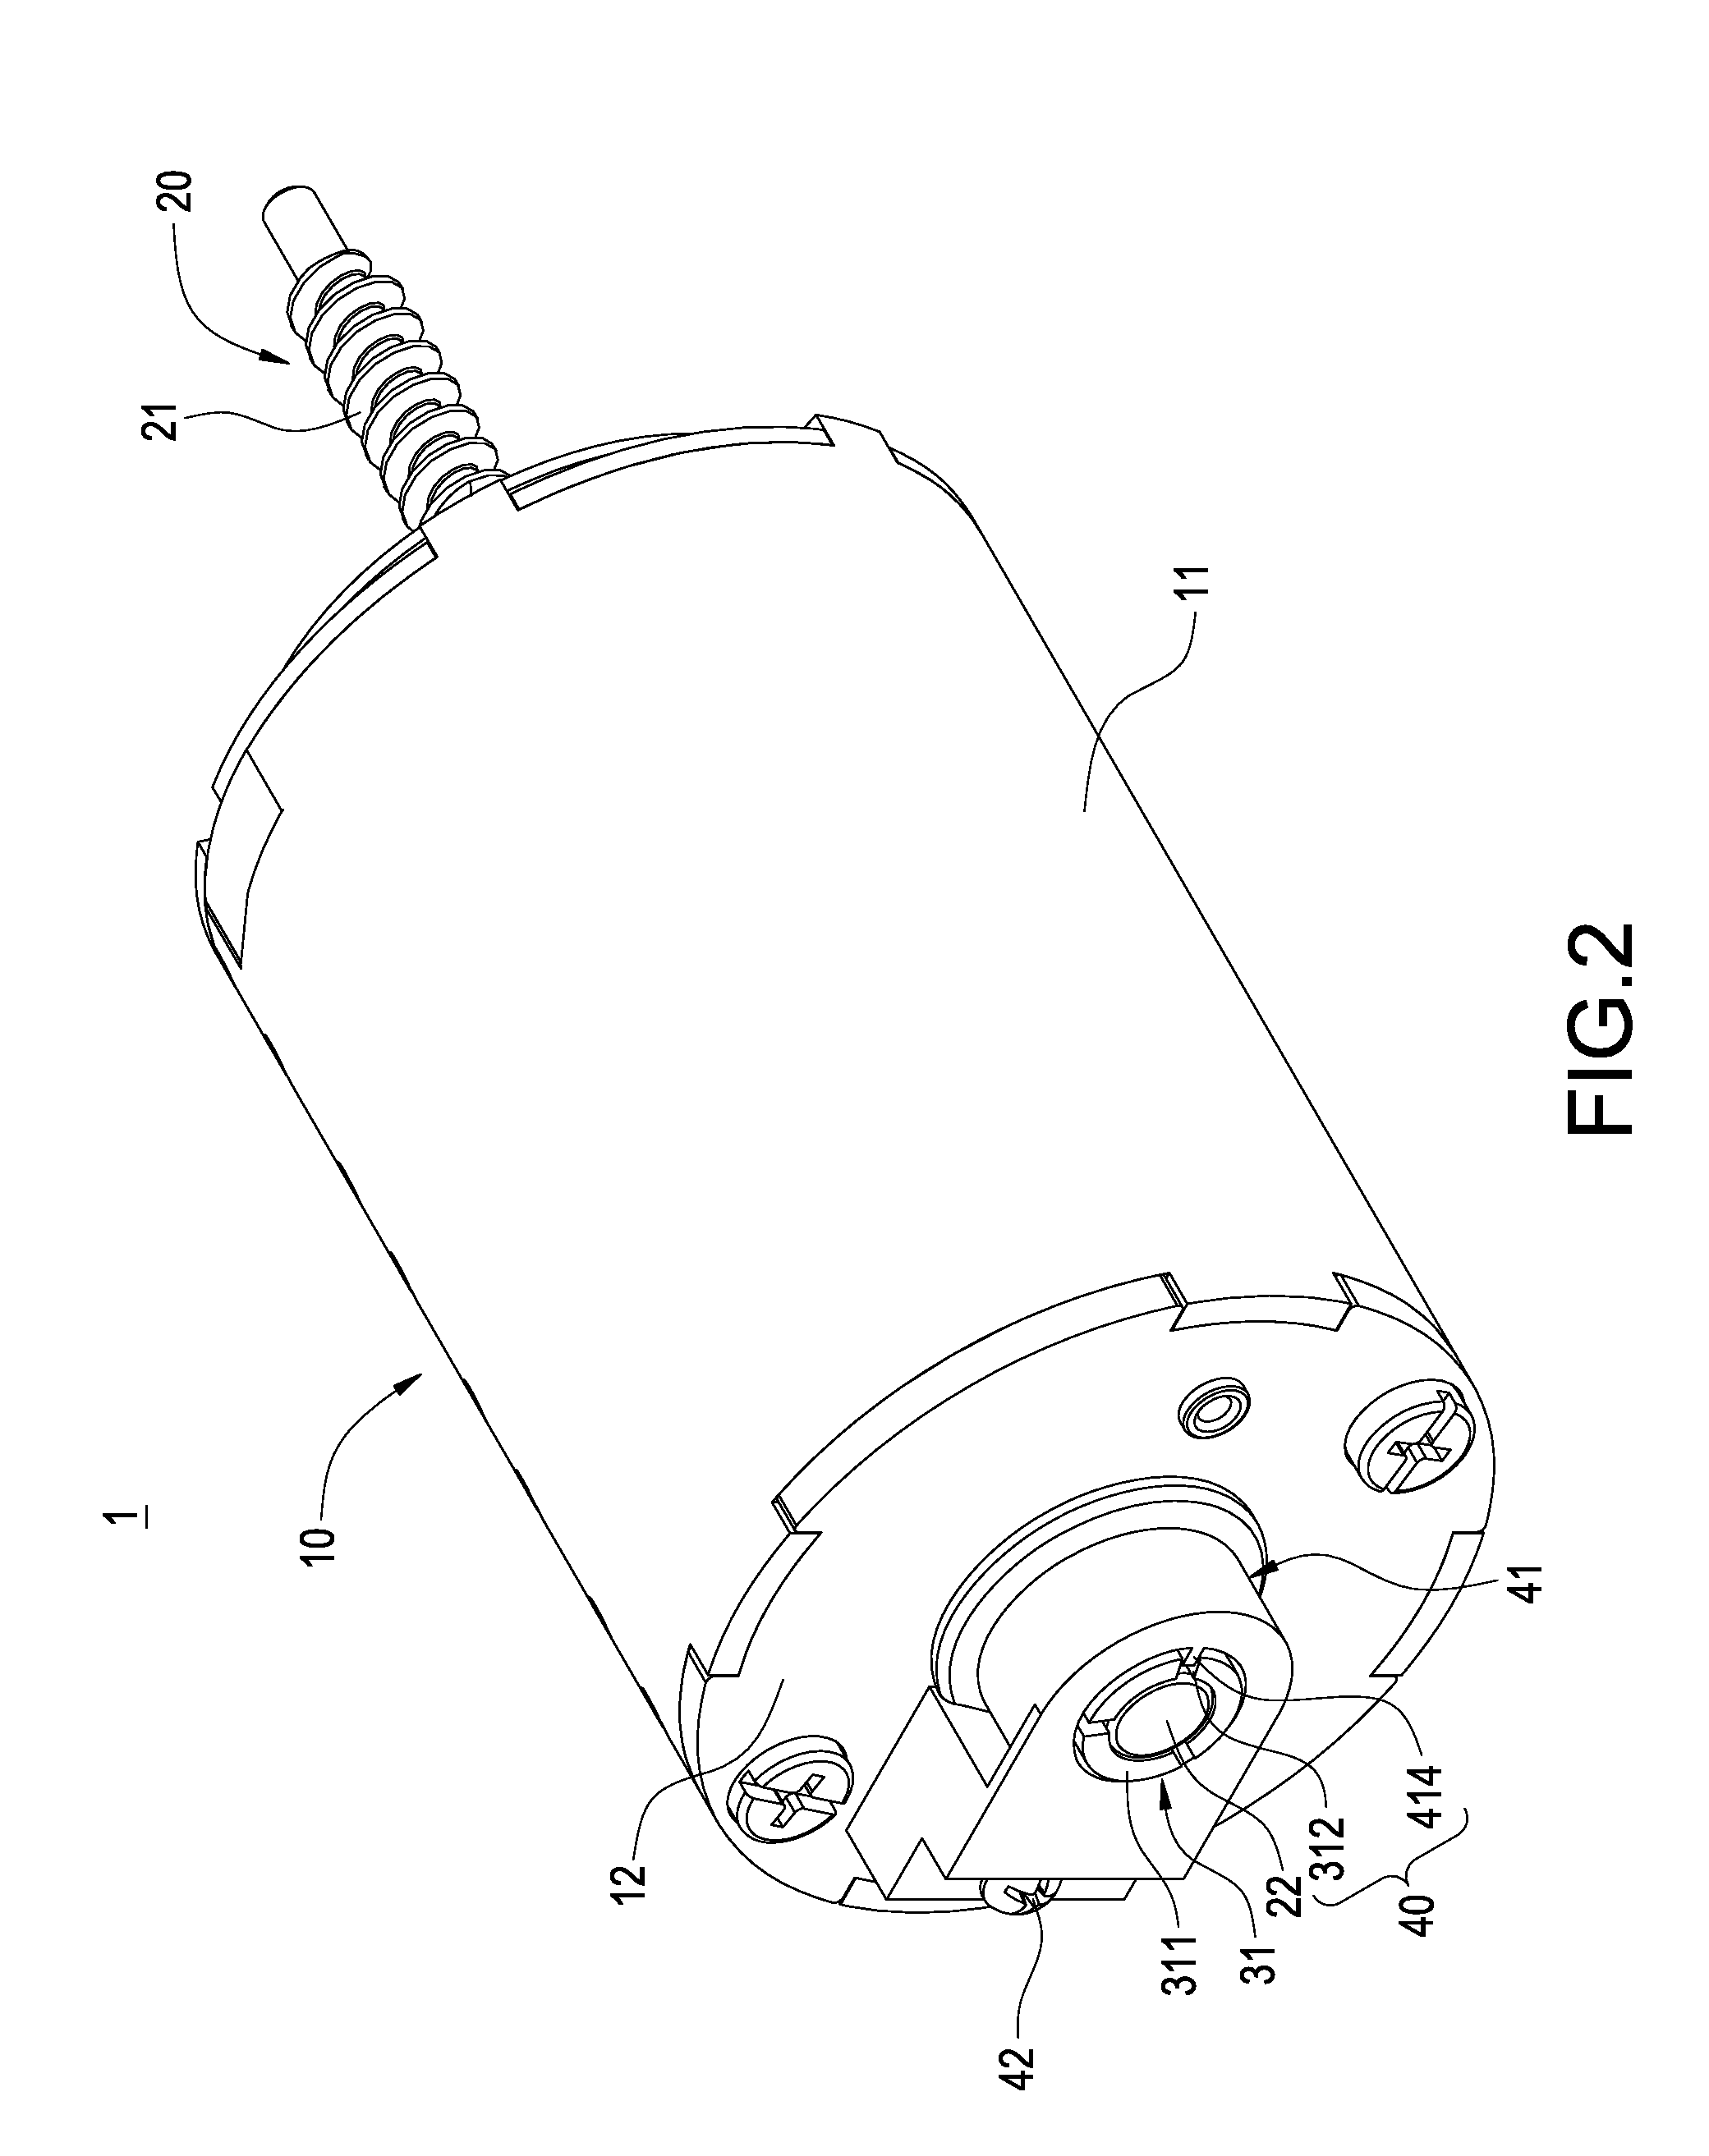 Motor having a braking function and used in linear actuator